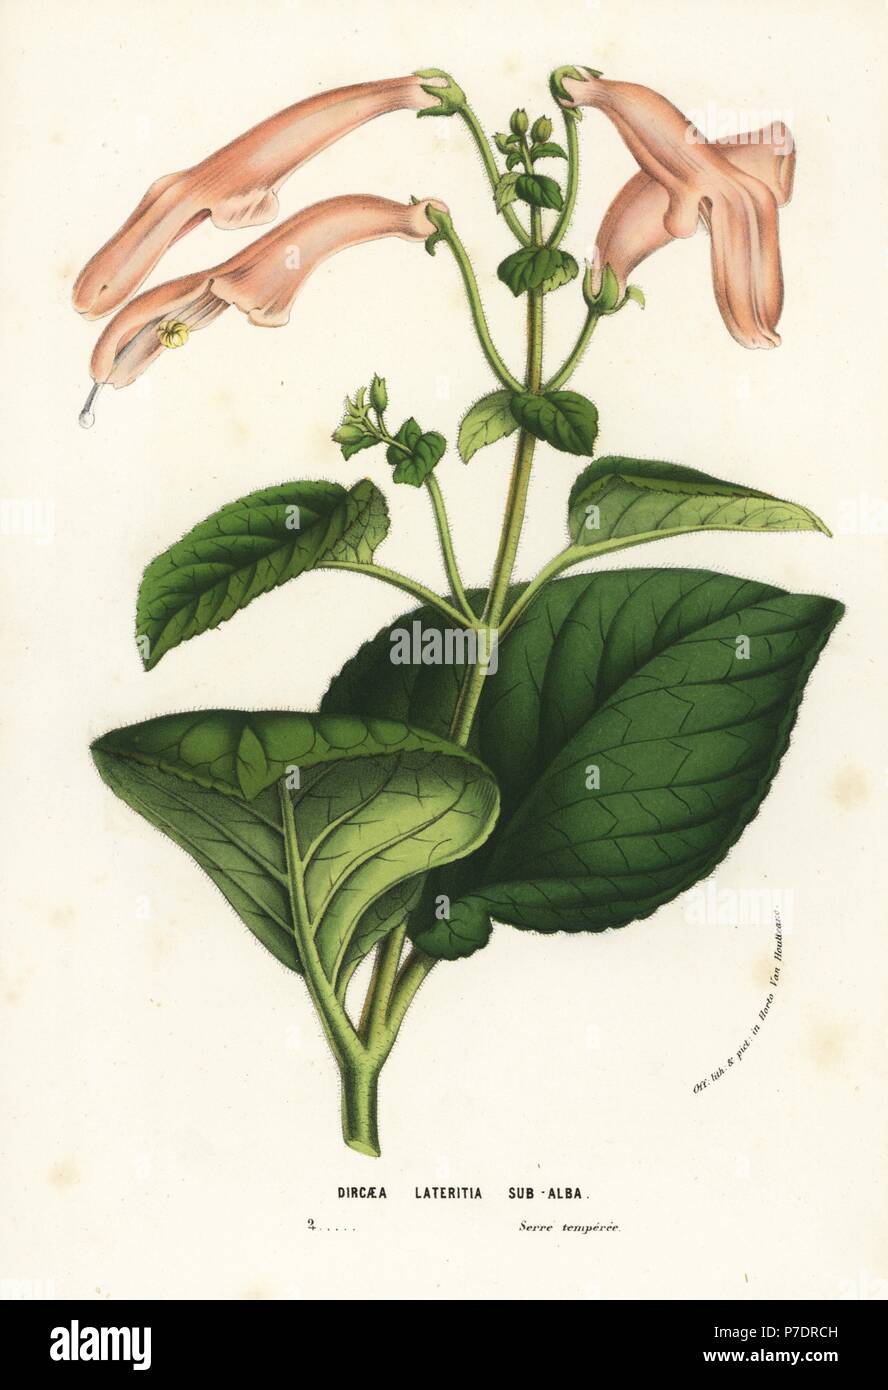 Sinningia cooperi (Dircaea lateritia). Handcoloured lithograph from Louis van Houtte and Charles Lemaire's Flowers of the Gardens and Hothouses of Europe, Flore des Serres et des Jardins de l'Europe, Ghent, Belgium, 1856. Stock Photo